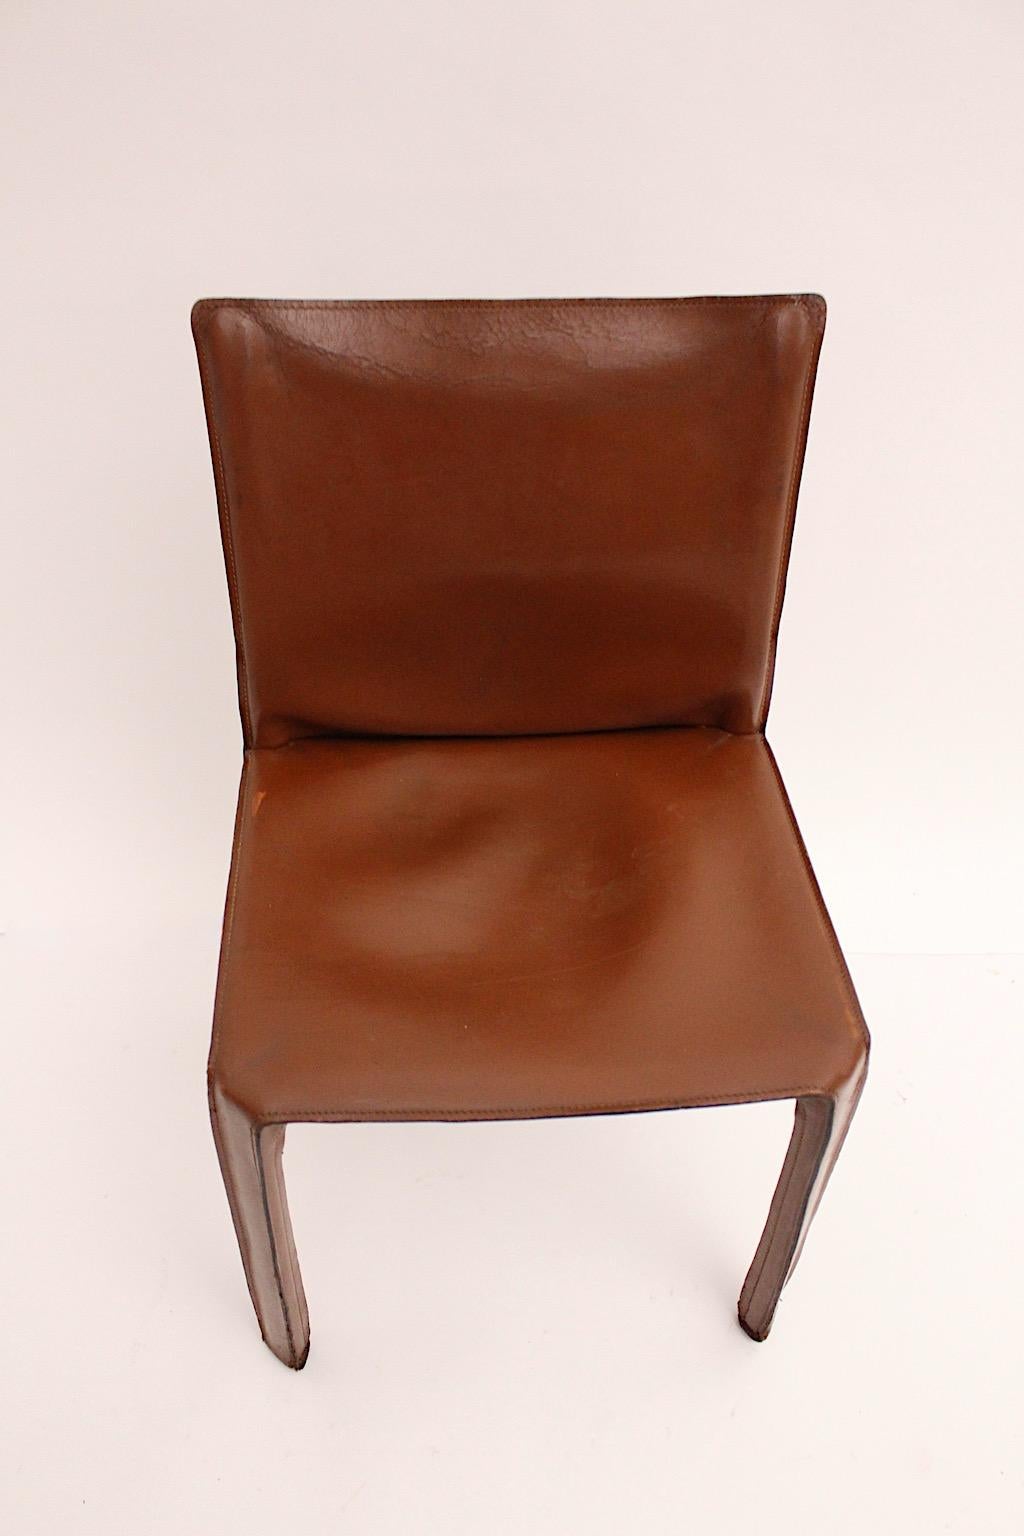 Modern Vintage Five Cognac Brown Leather CAB Dining Chairs Mario Bellini, Italy 2